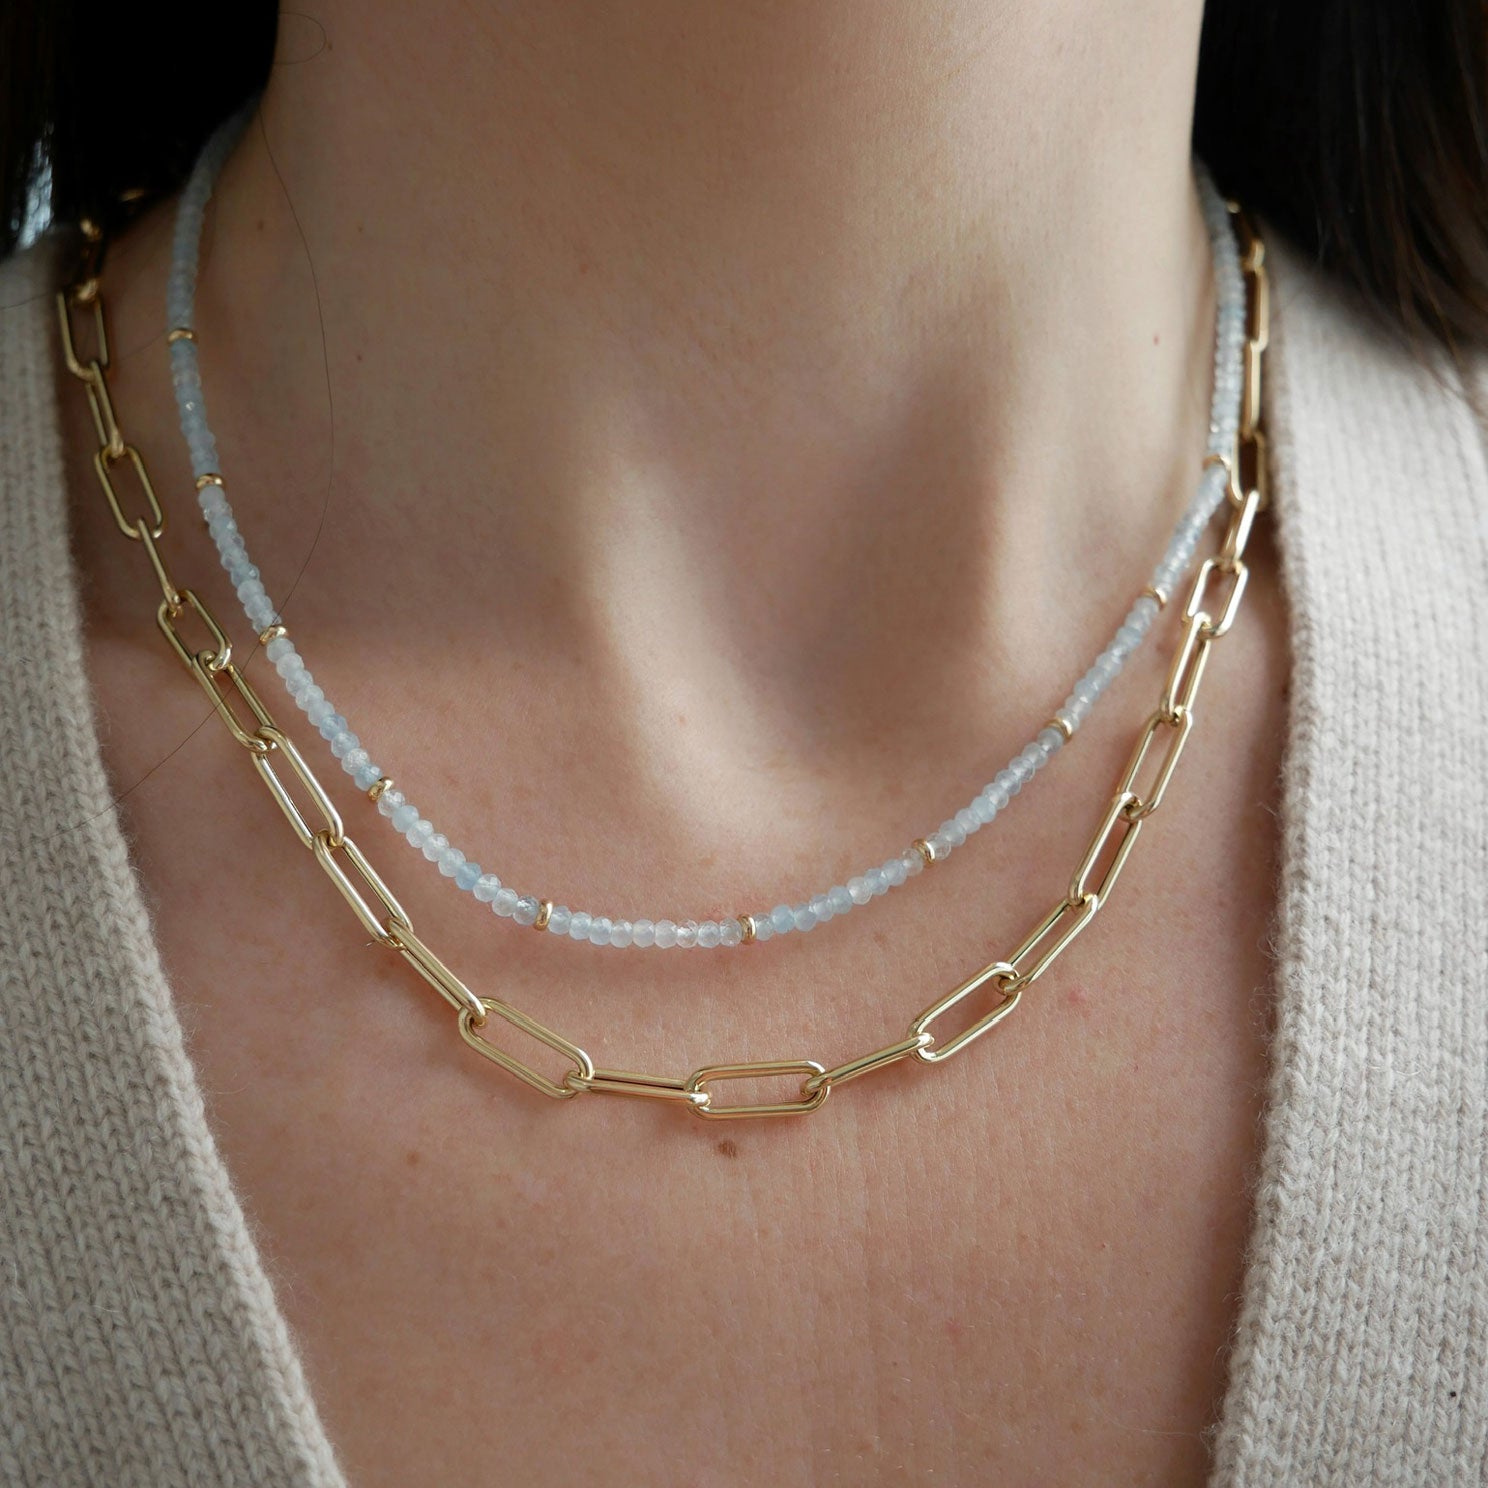 Birthstone Bead Necklace In Aquamarine styled on neck of model with gold jumbo chain necklace and wearing tan sweater